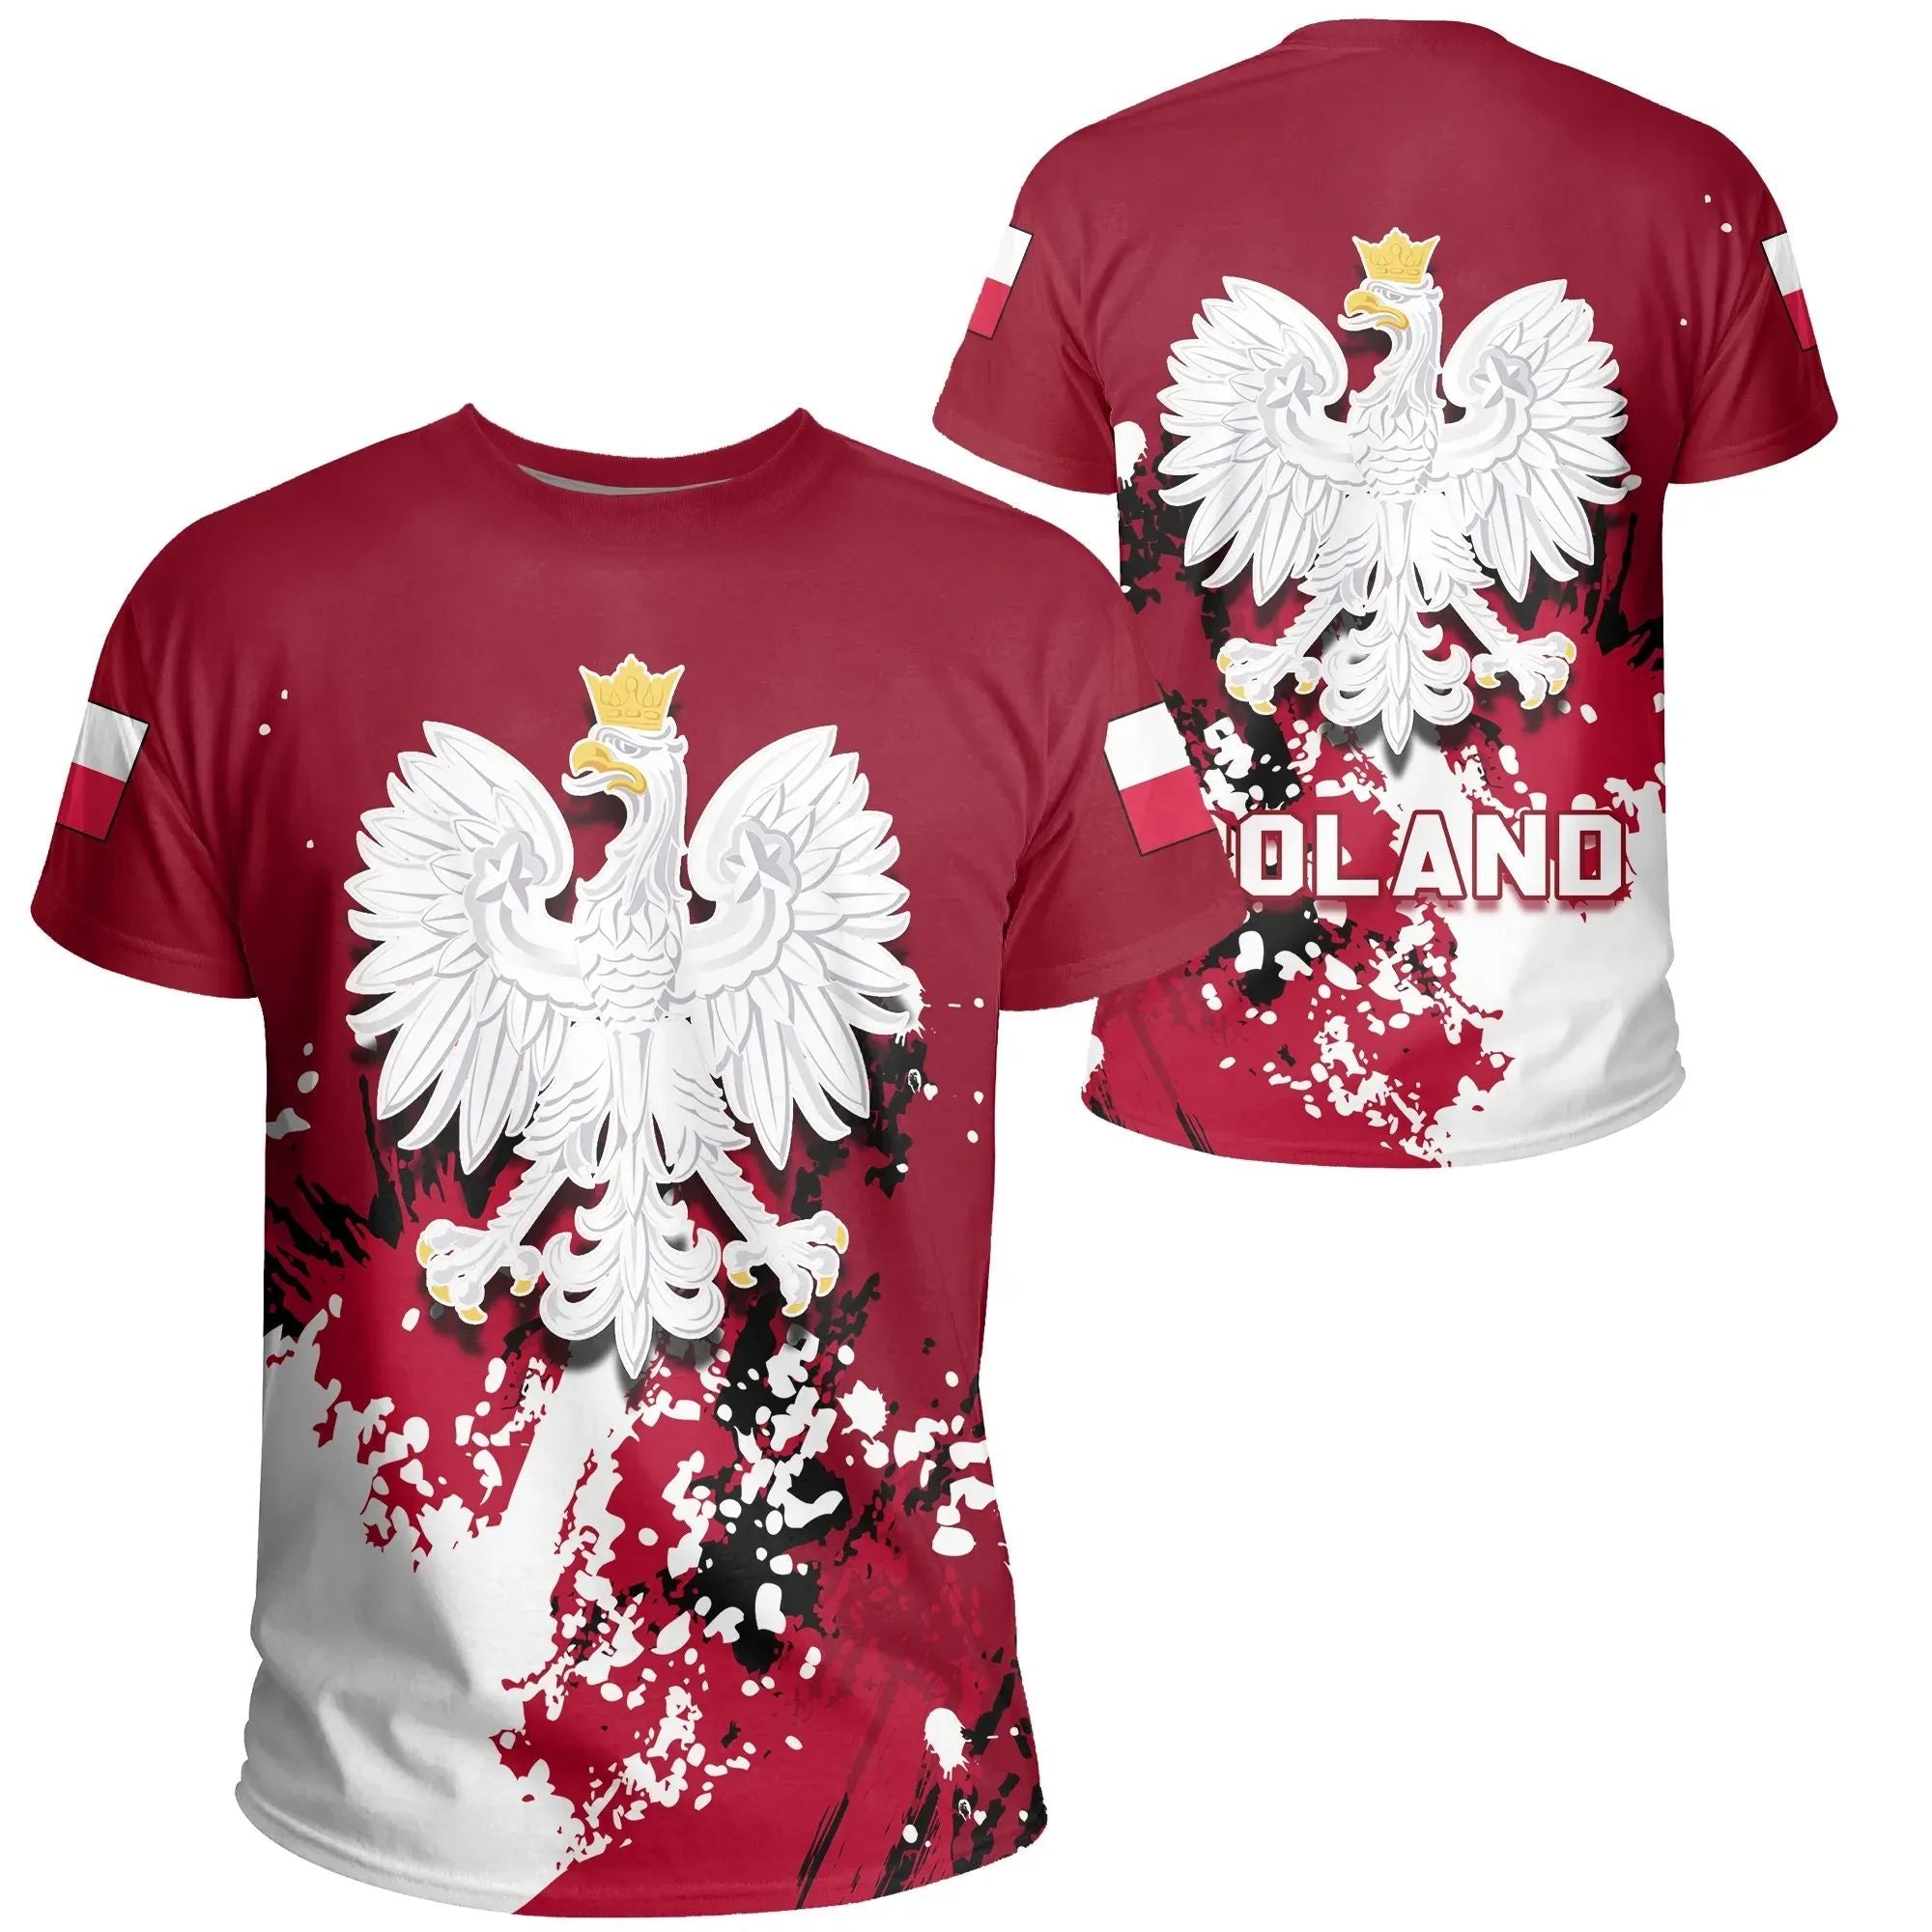 poland-coat-of-arms-t-shirt-spaint-style